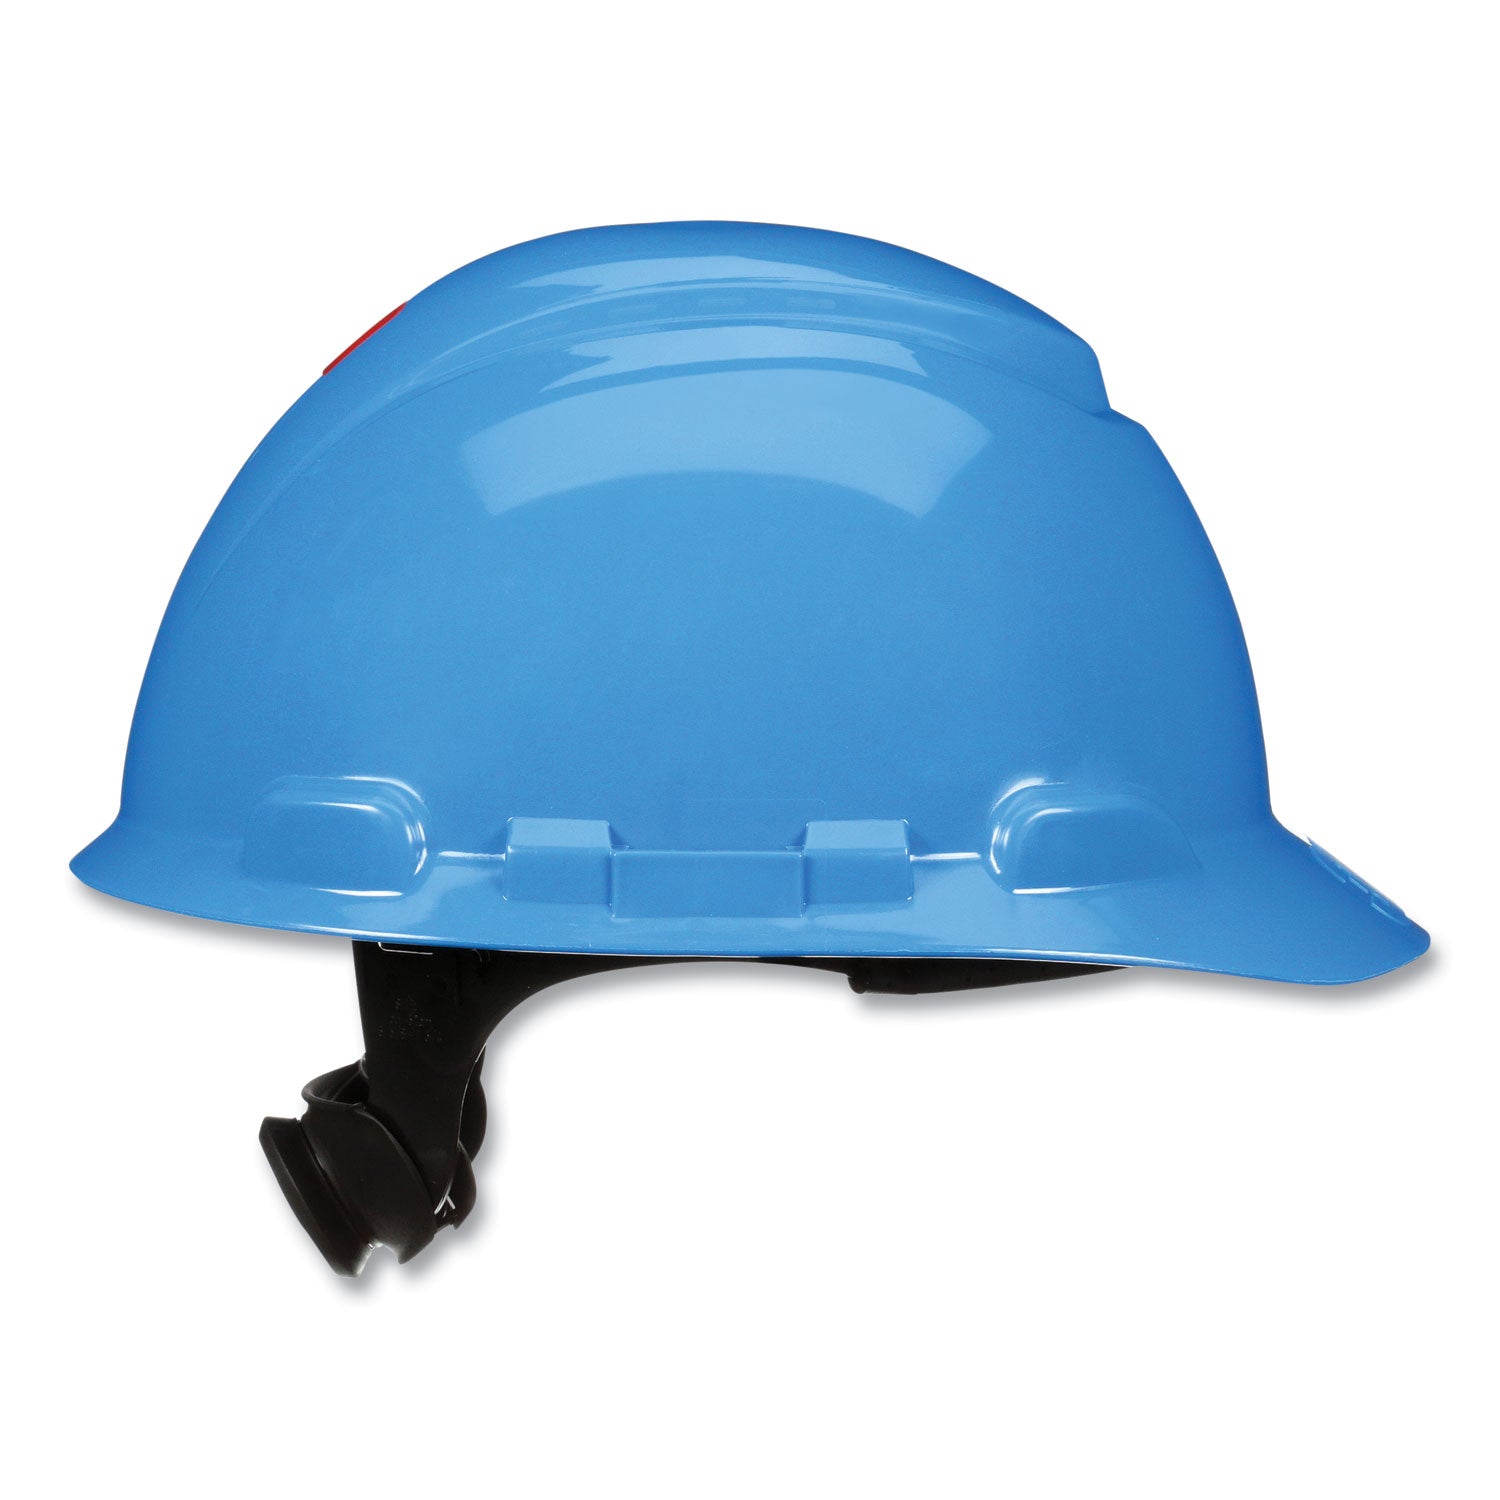 securefit-h-series-hard-hats-h-700-cap-with-uv-indicator-4-point-pressure-diffusion-ratchet-suspension-blue_mmmh703sfruv - 2